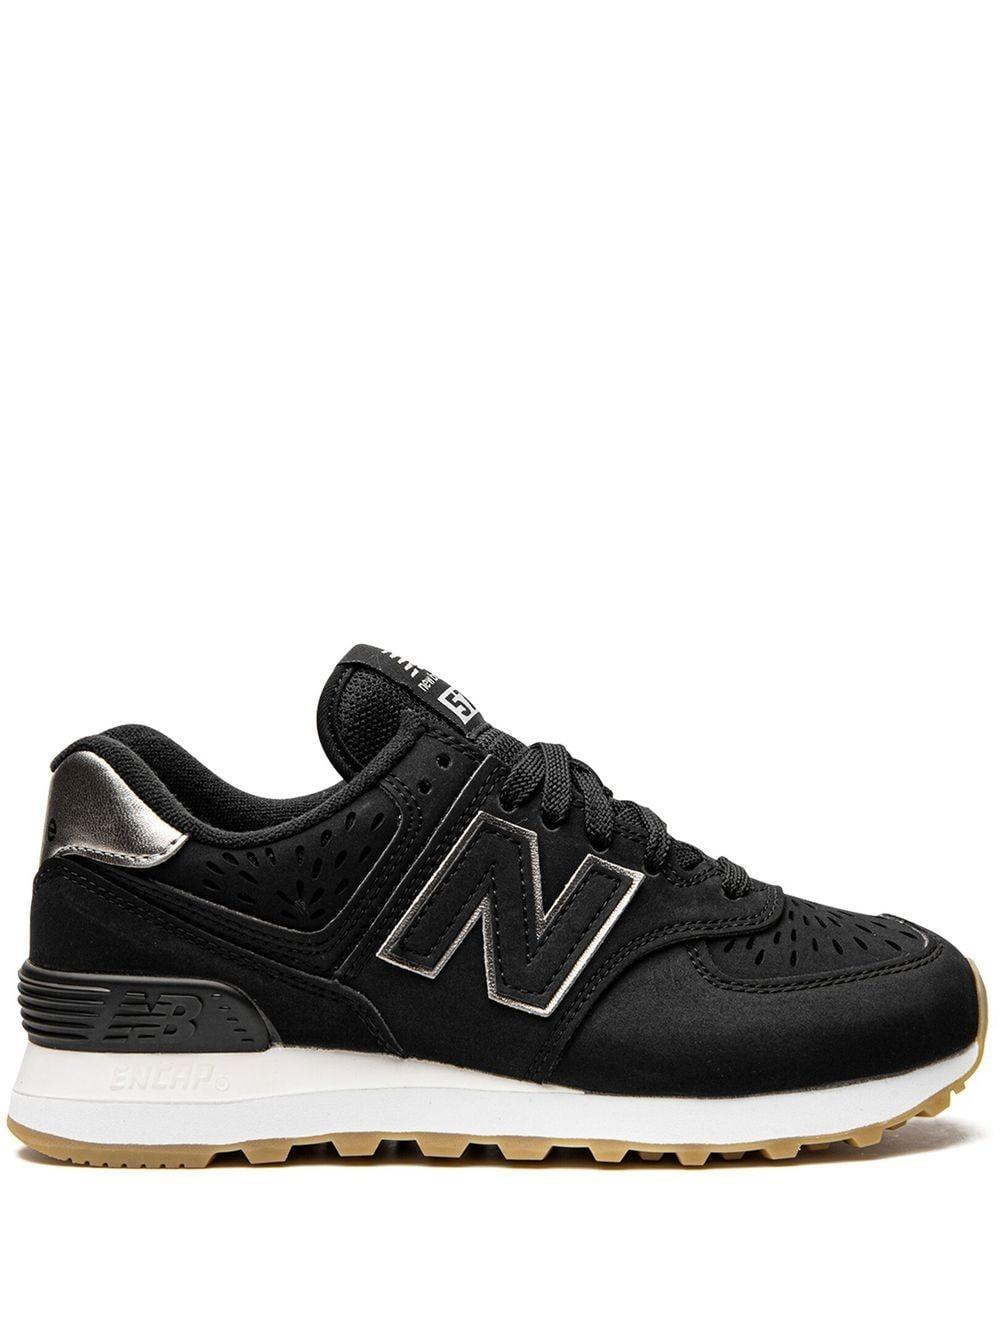 New Balance Leather 574 Low-top Sneakers in Black | Lyst